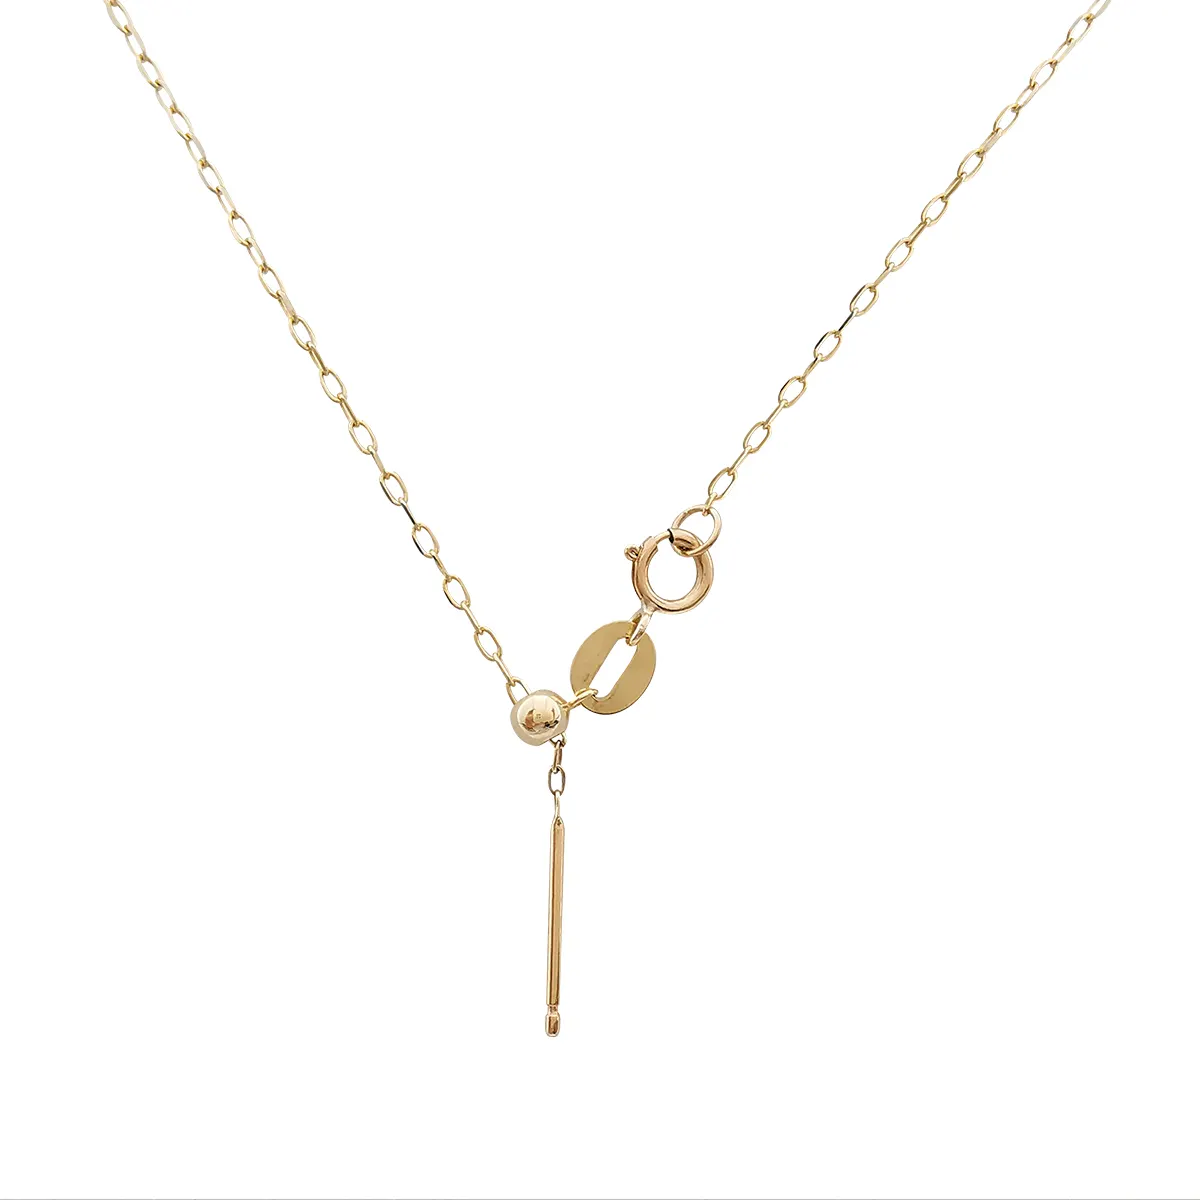 Hip Hop Fine Jewelry AU375 9K Solid Gold Necklace Cross Chain Good Quality Wholesale In Stock Chain